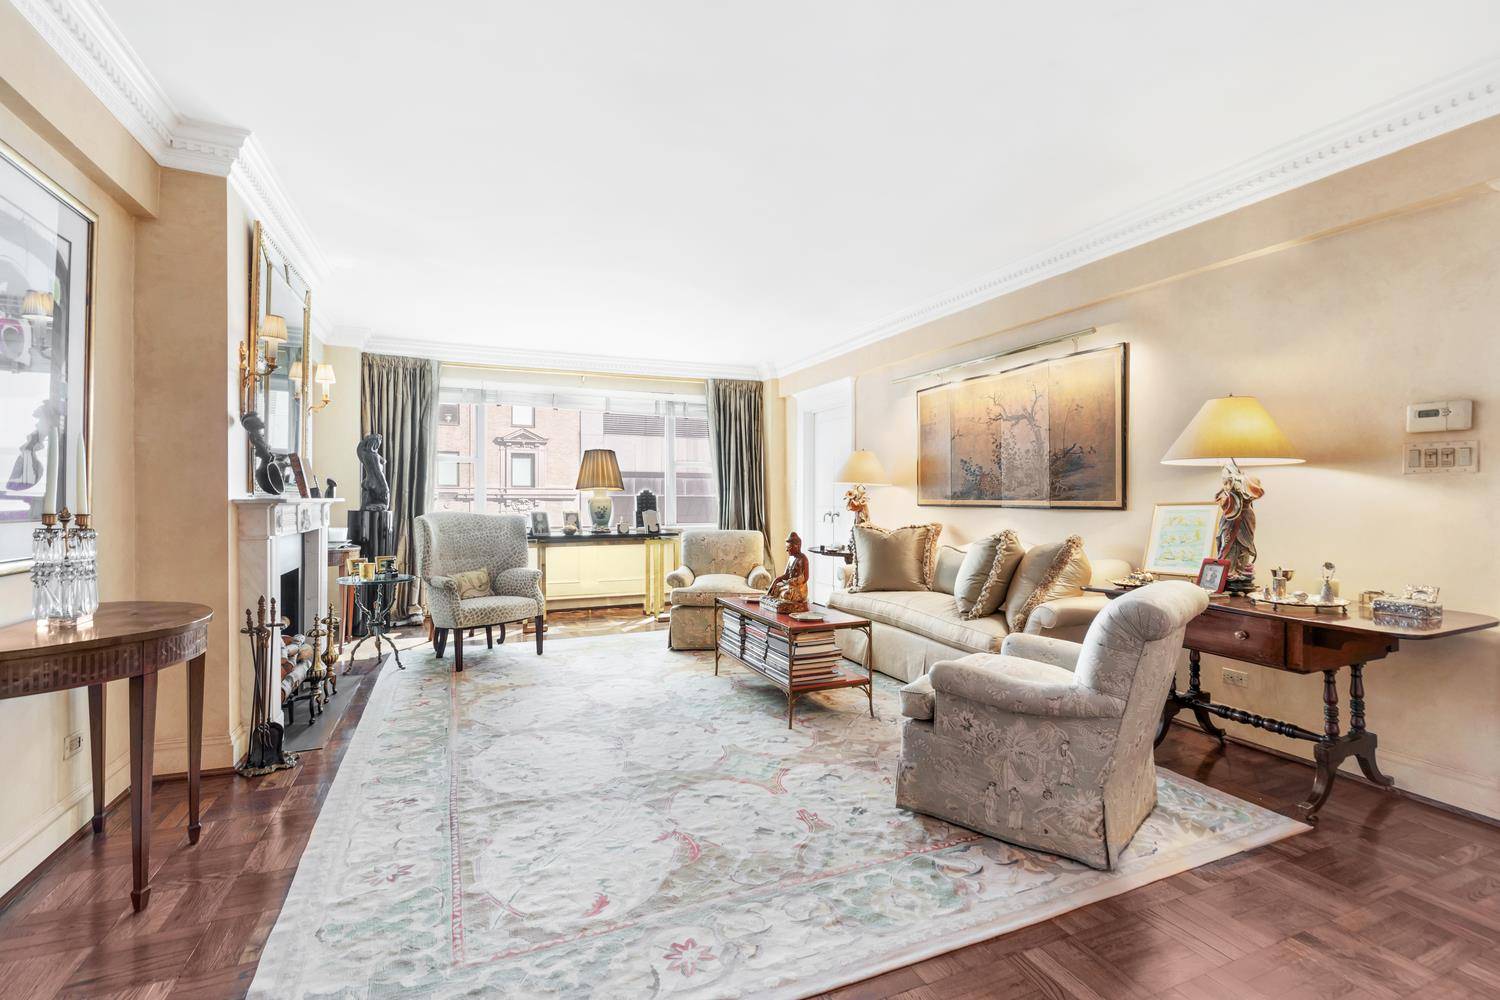 Right off Billionaire's row at the corner of Park Avenue and 57th Street, an 8 Room, 4 Bedroom 4 Bathroom Apartment is generously apportioned to accommodate the most discerning buyer.